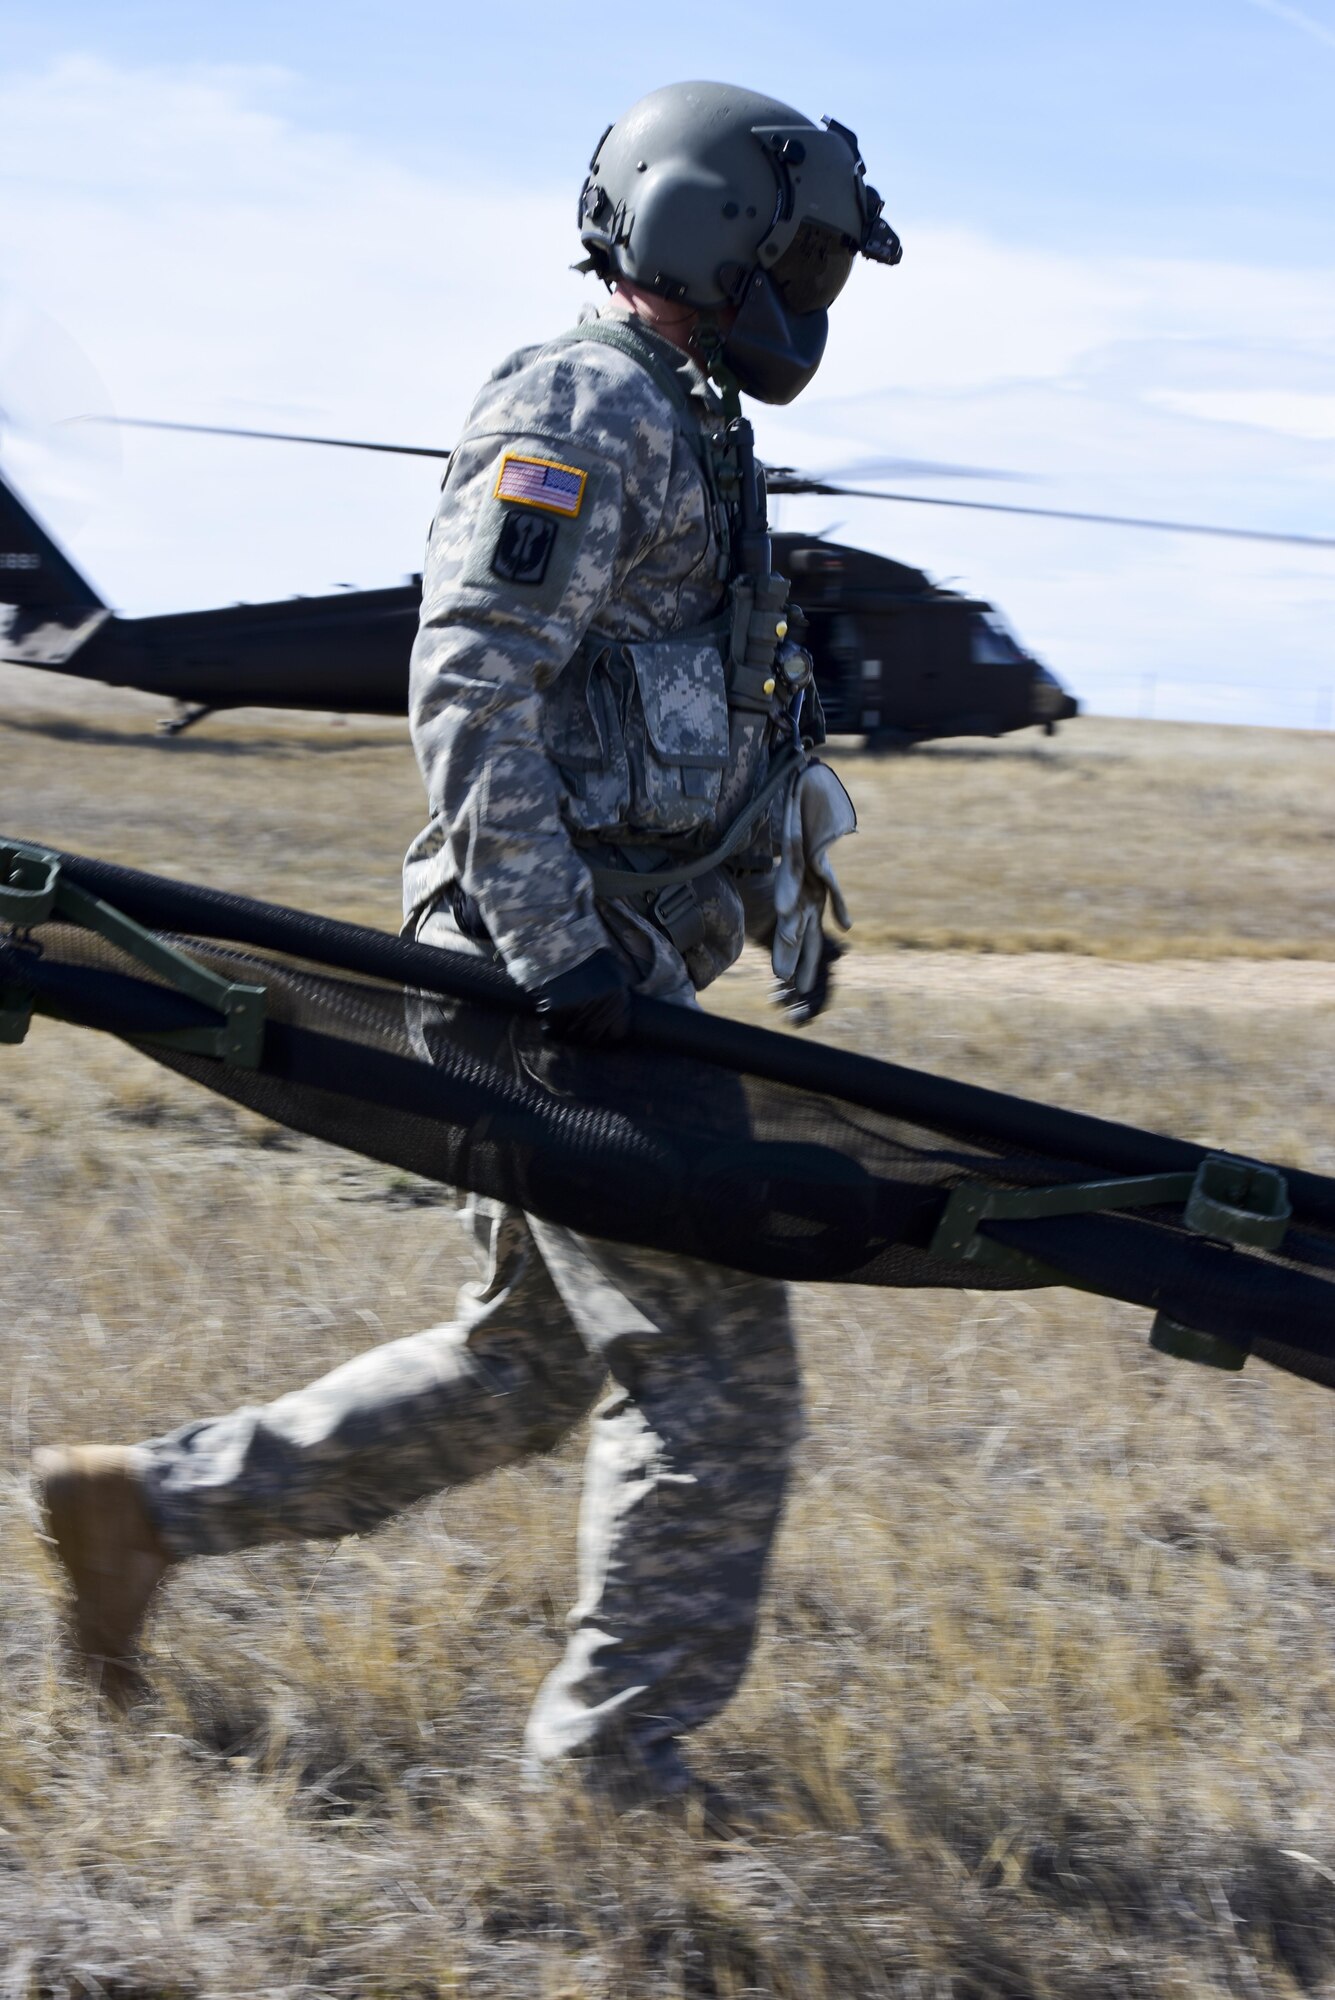 A U.S. Soldier with the South Dakota National Guard moves a portable litter during exercise Combat Raider at the Powder River Training Complex, March 15, 2017. Medical technicians with the SDNG participated in the exercise by providing a medical evacuation for Airmen acting as downed pilots. (U.S. Air Force photo by Airman 1st Class Randahl J. Jenson)